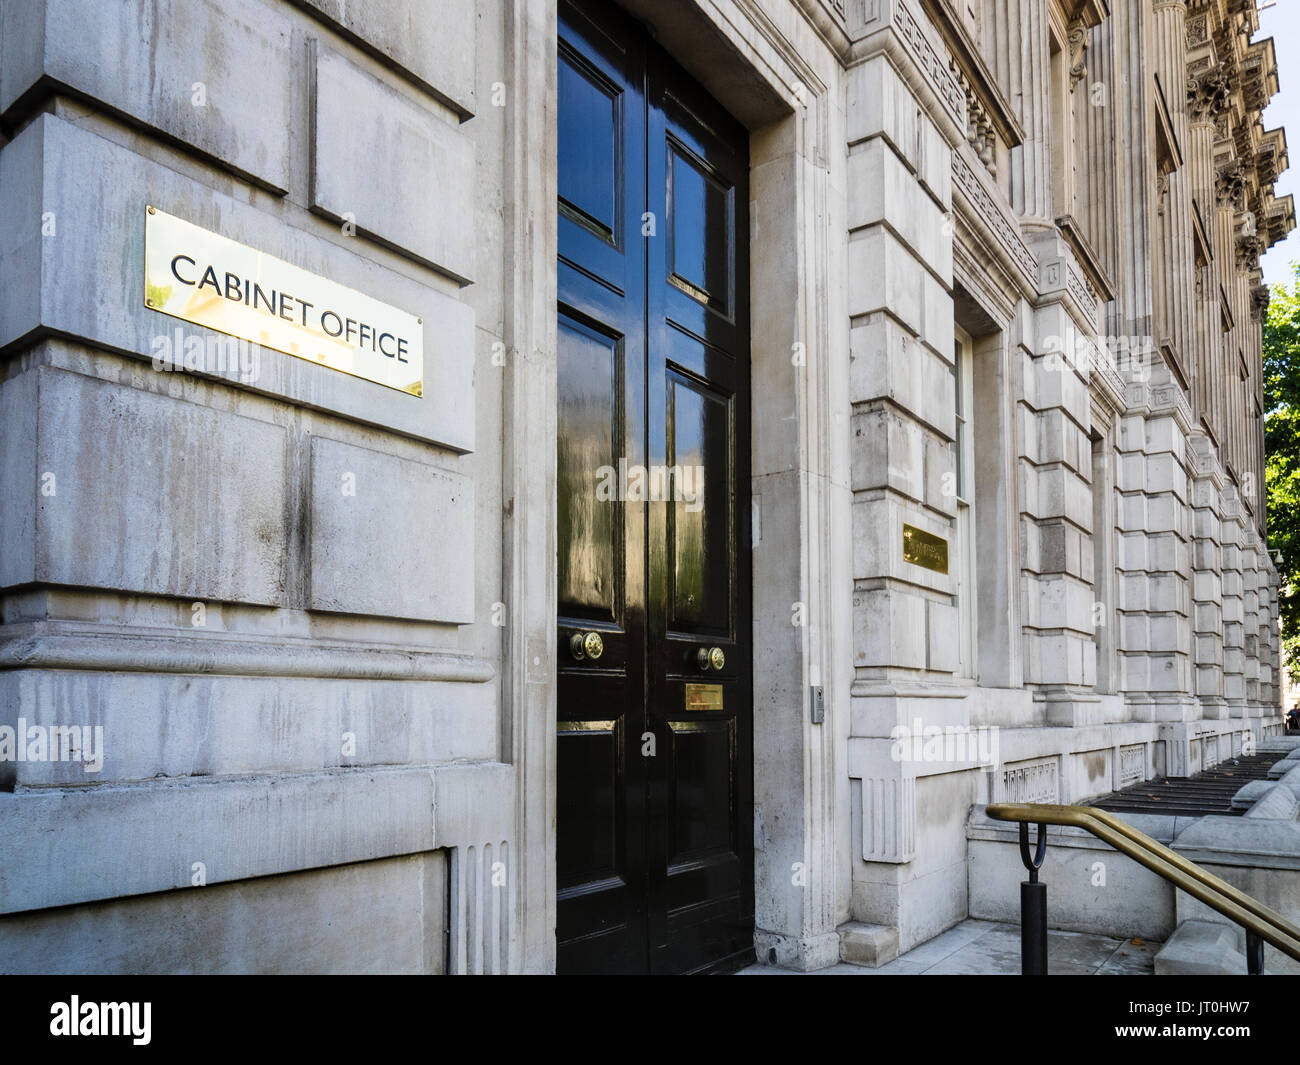 Cabinet Office - The entry to the British Government Cabinet Office in Whitehall, central London. Stock Photo